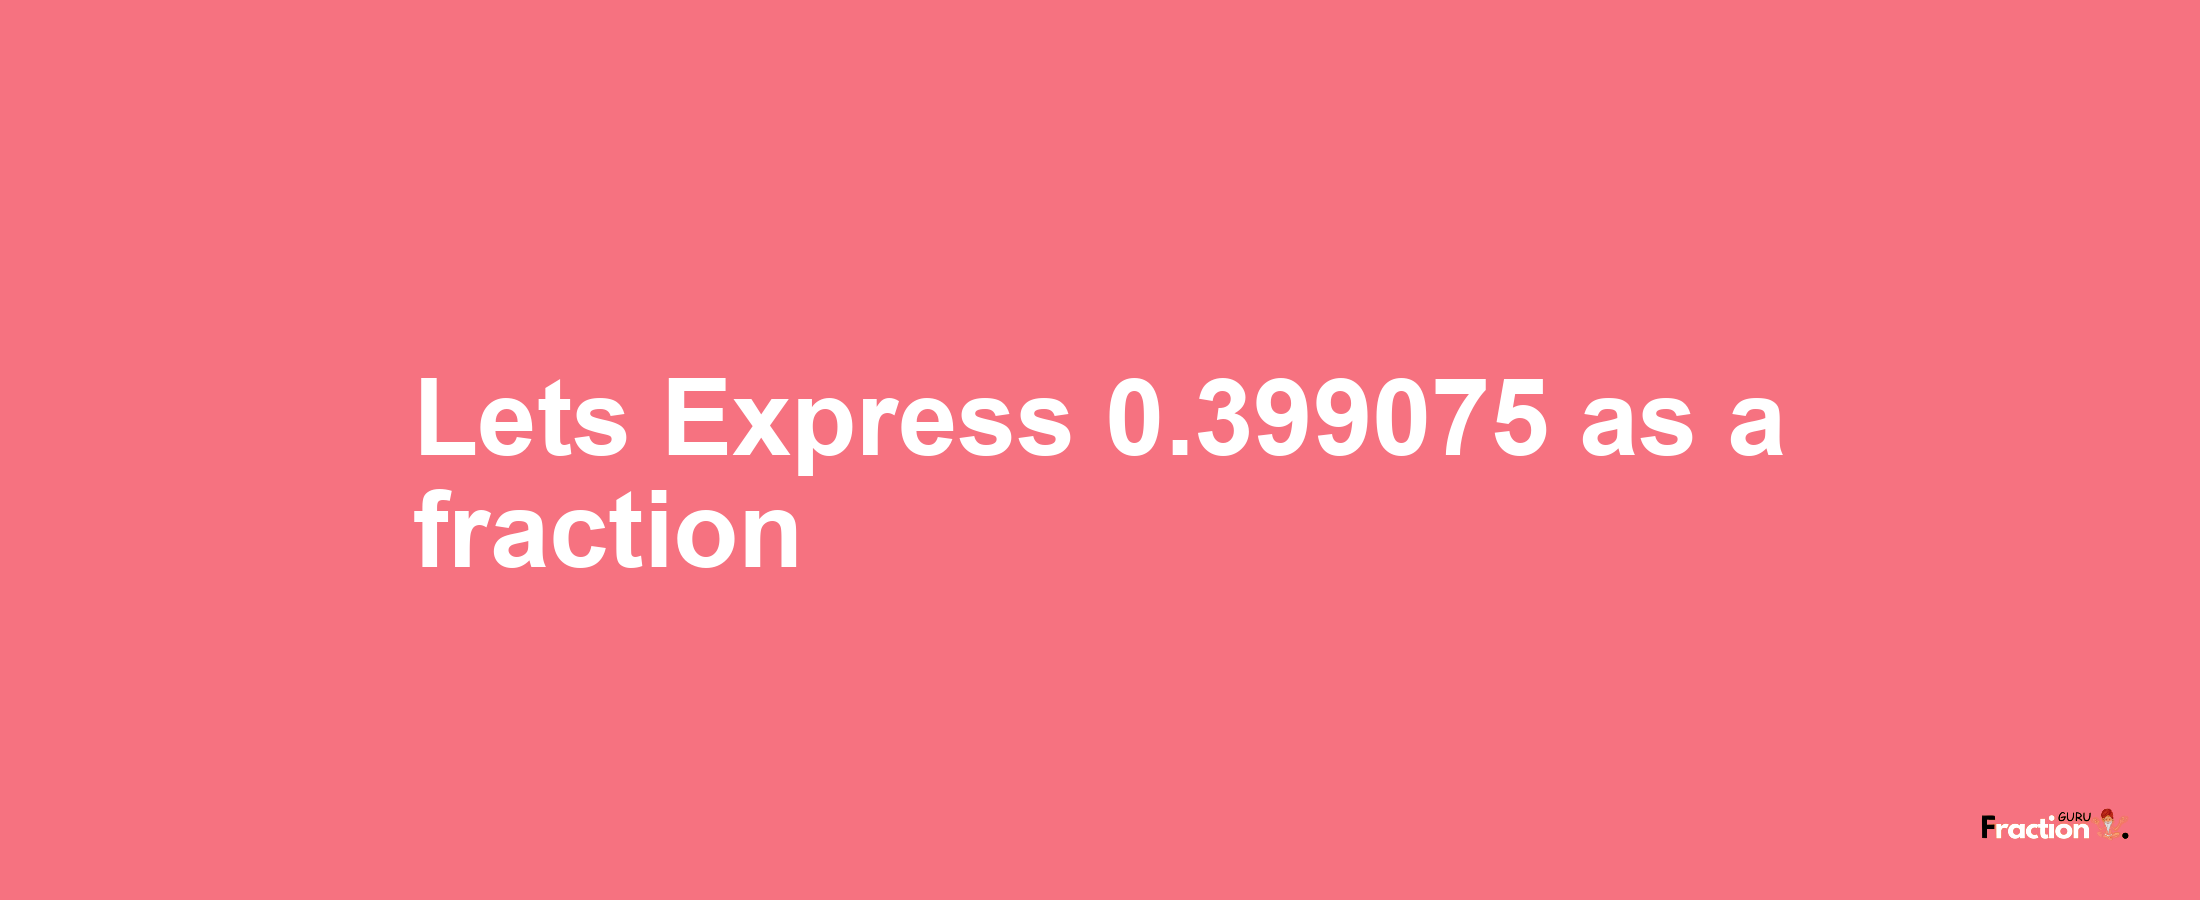 Lets Express 0.399075 as afraction